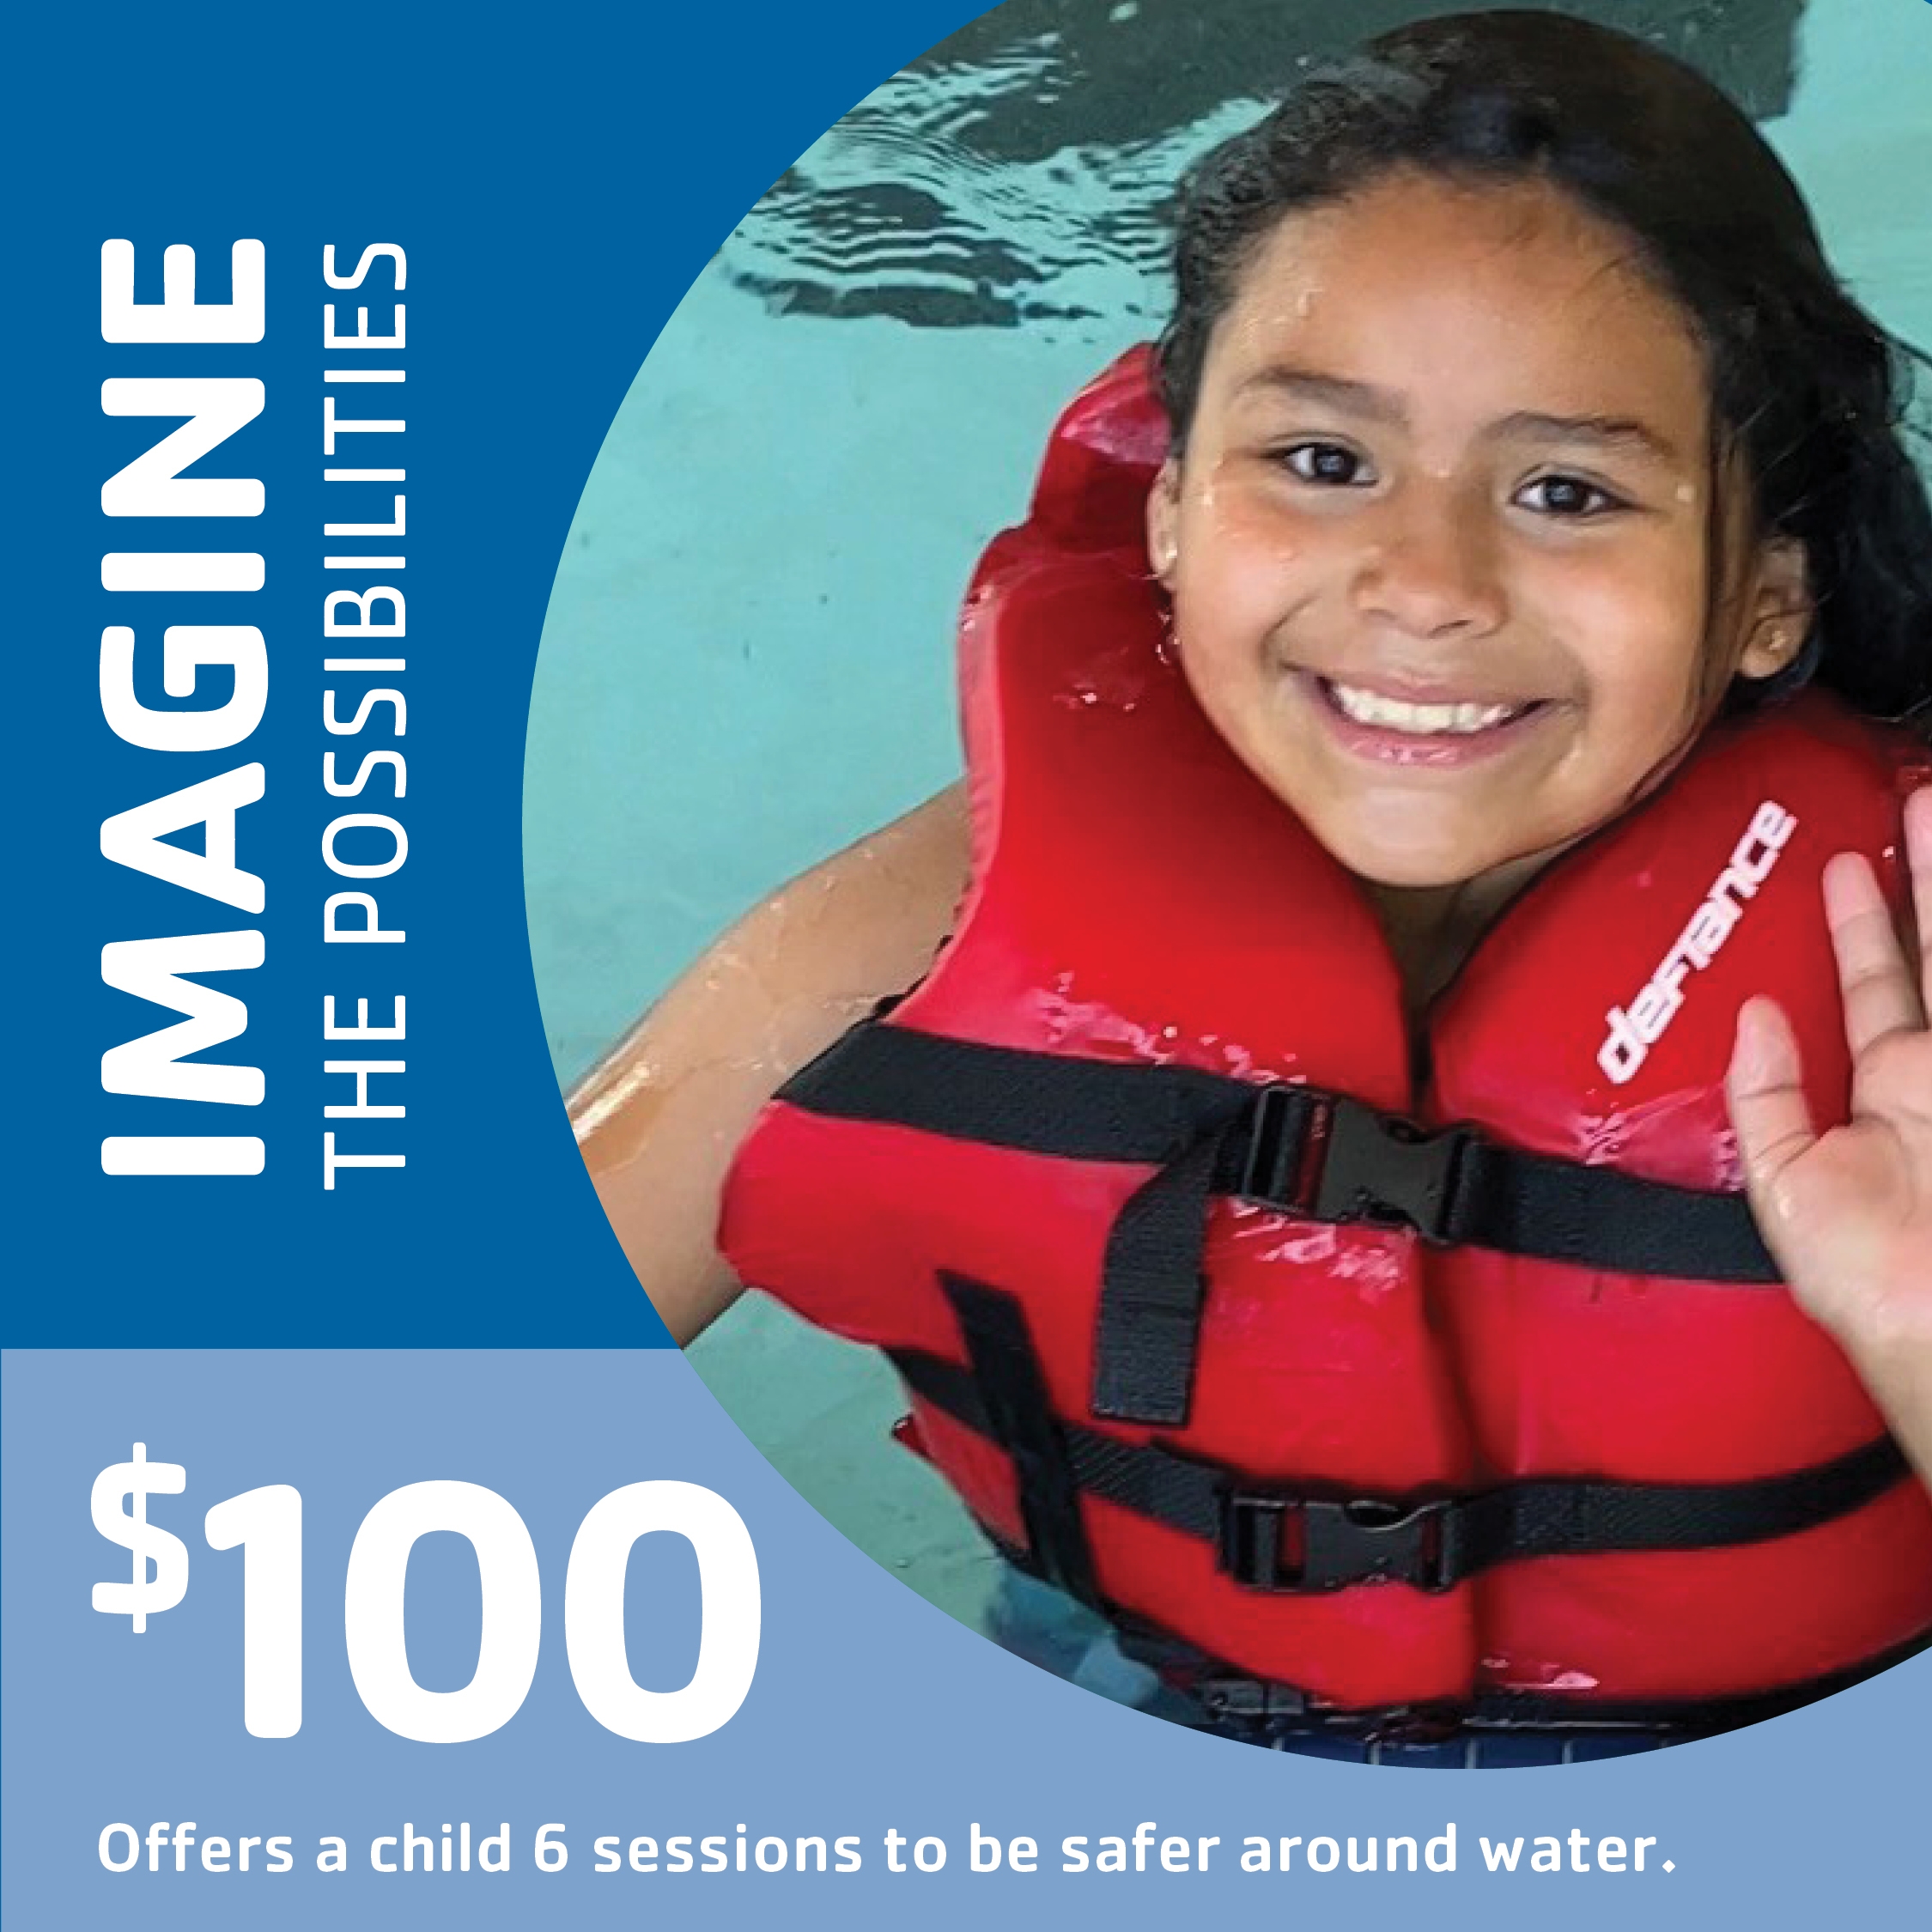 $100 offers a child 6 sessions to be safer around water